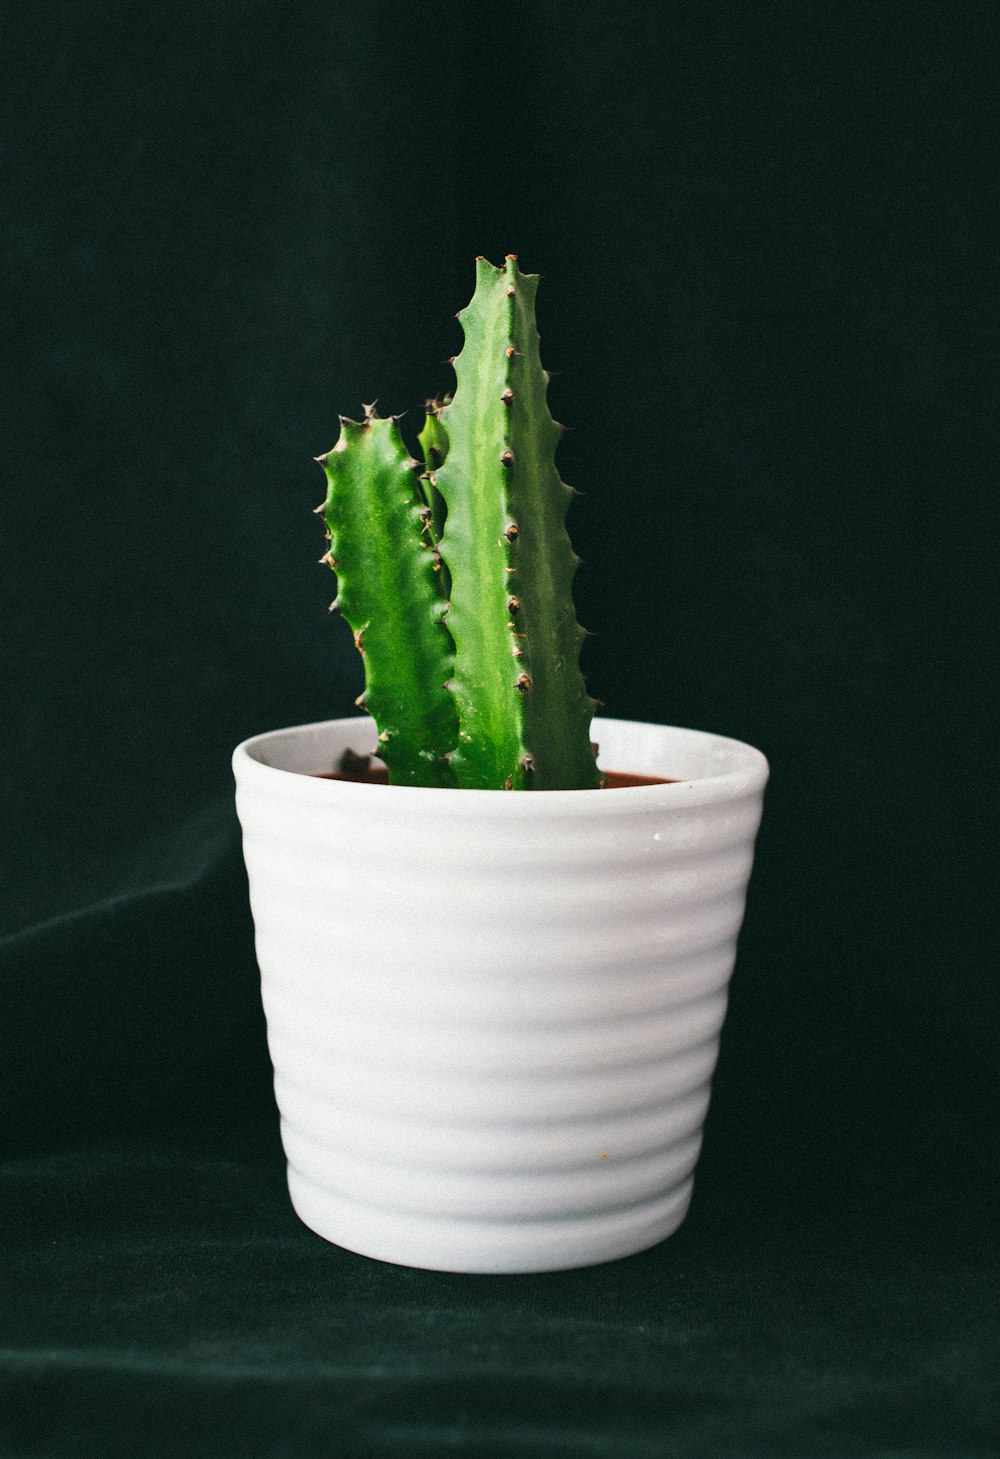 photo of green cactus plant and white pot